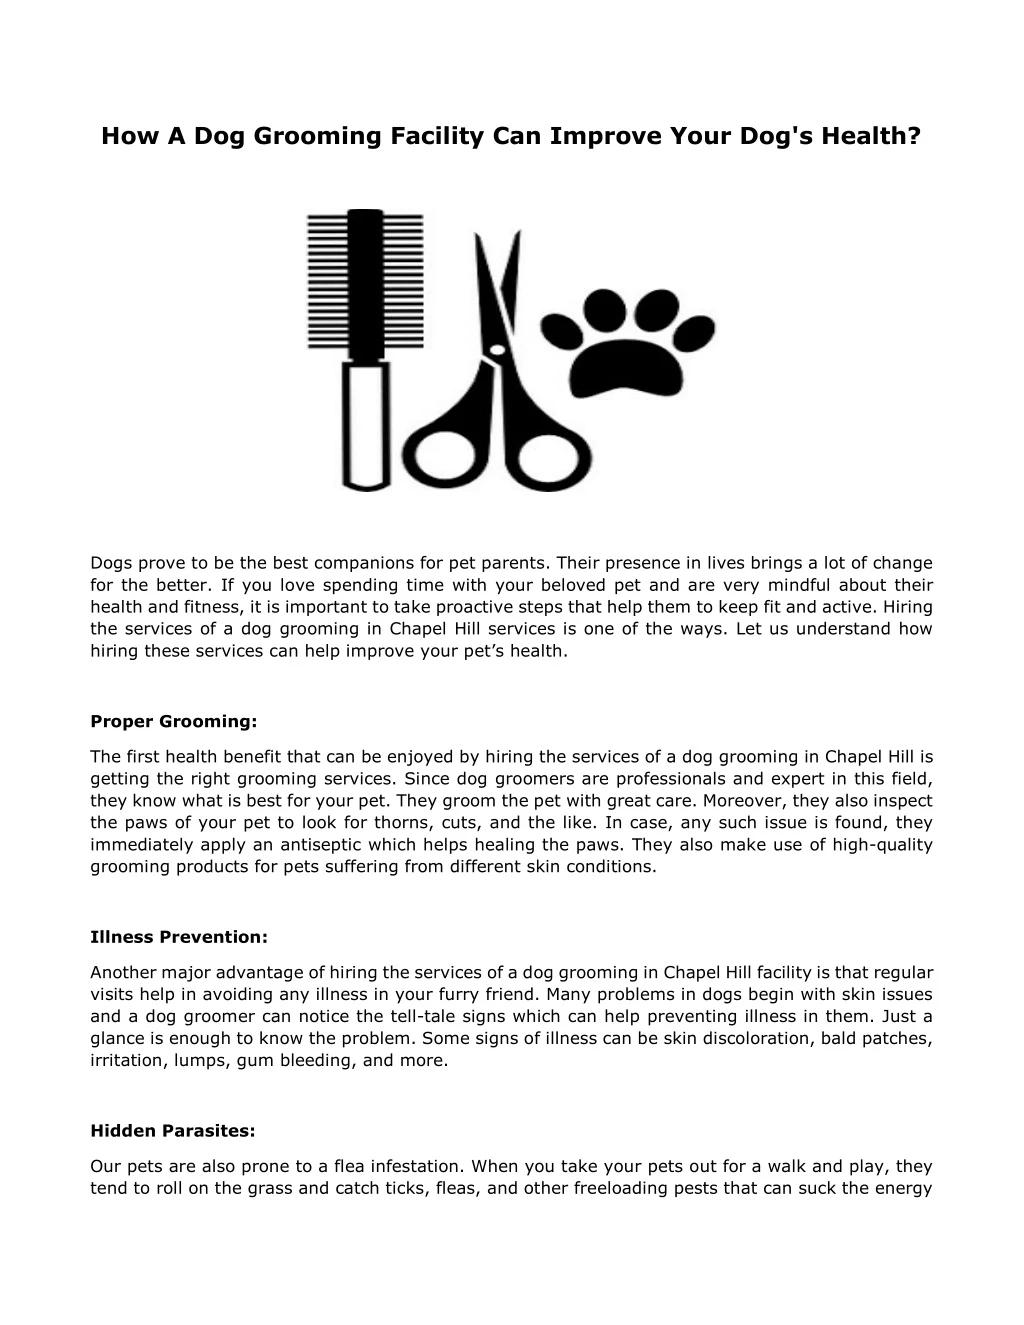 how a dog grooming facility can improve your